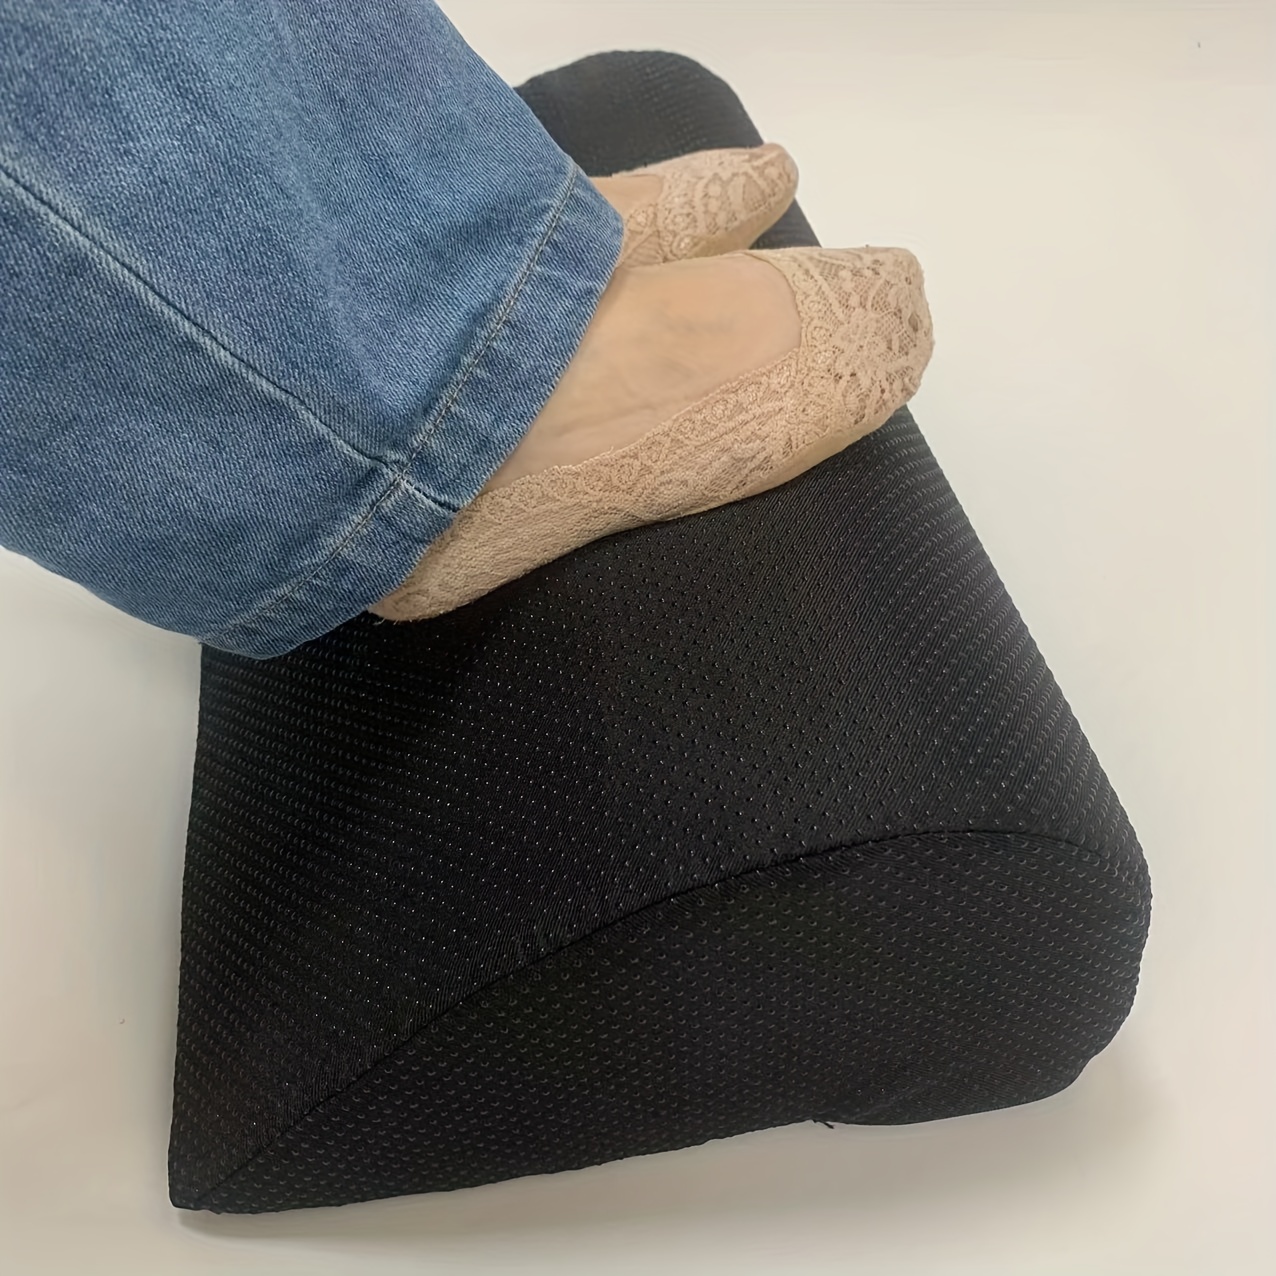 Foot Rest For Under Desk At Work, Ergonomic Office Desk Foot Rest -under  Desk Footrest With Washable Cover -desk Foot Stool Work From Home  Accessories- Foam Foot Stool Rocker, Office Footrest 